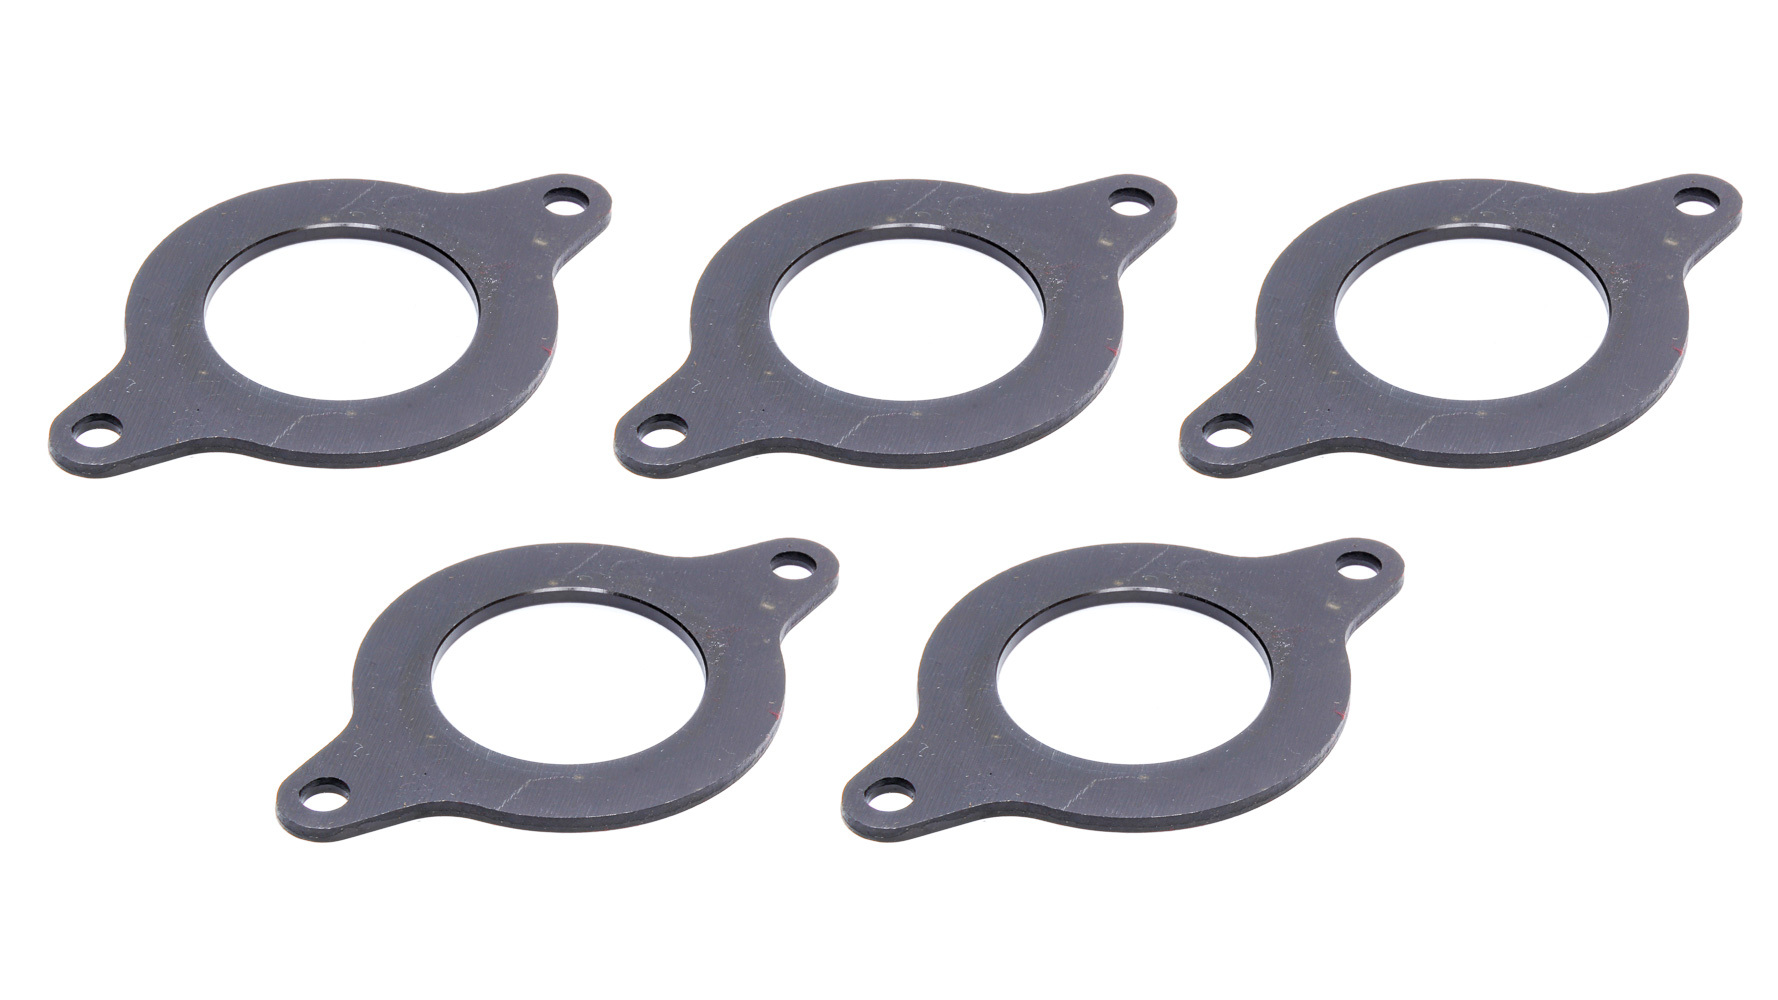 Enginequest CP350N Camshaft Thrust Plate, 0.118 in Thick, Steel, Black Oxide, Small Block Chevy, Set of 5